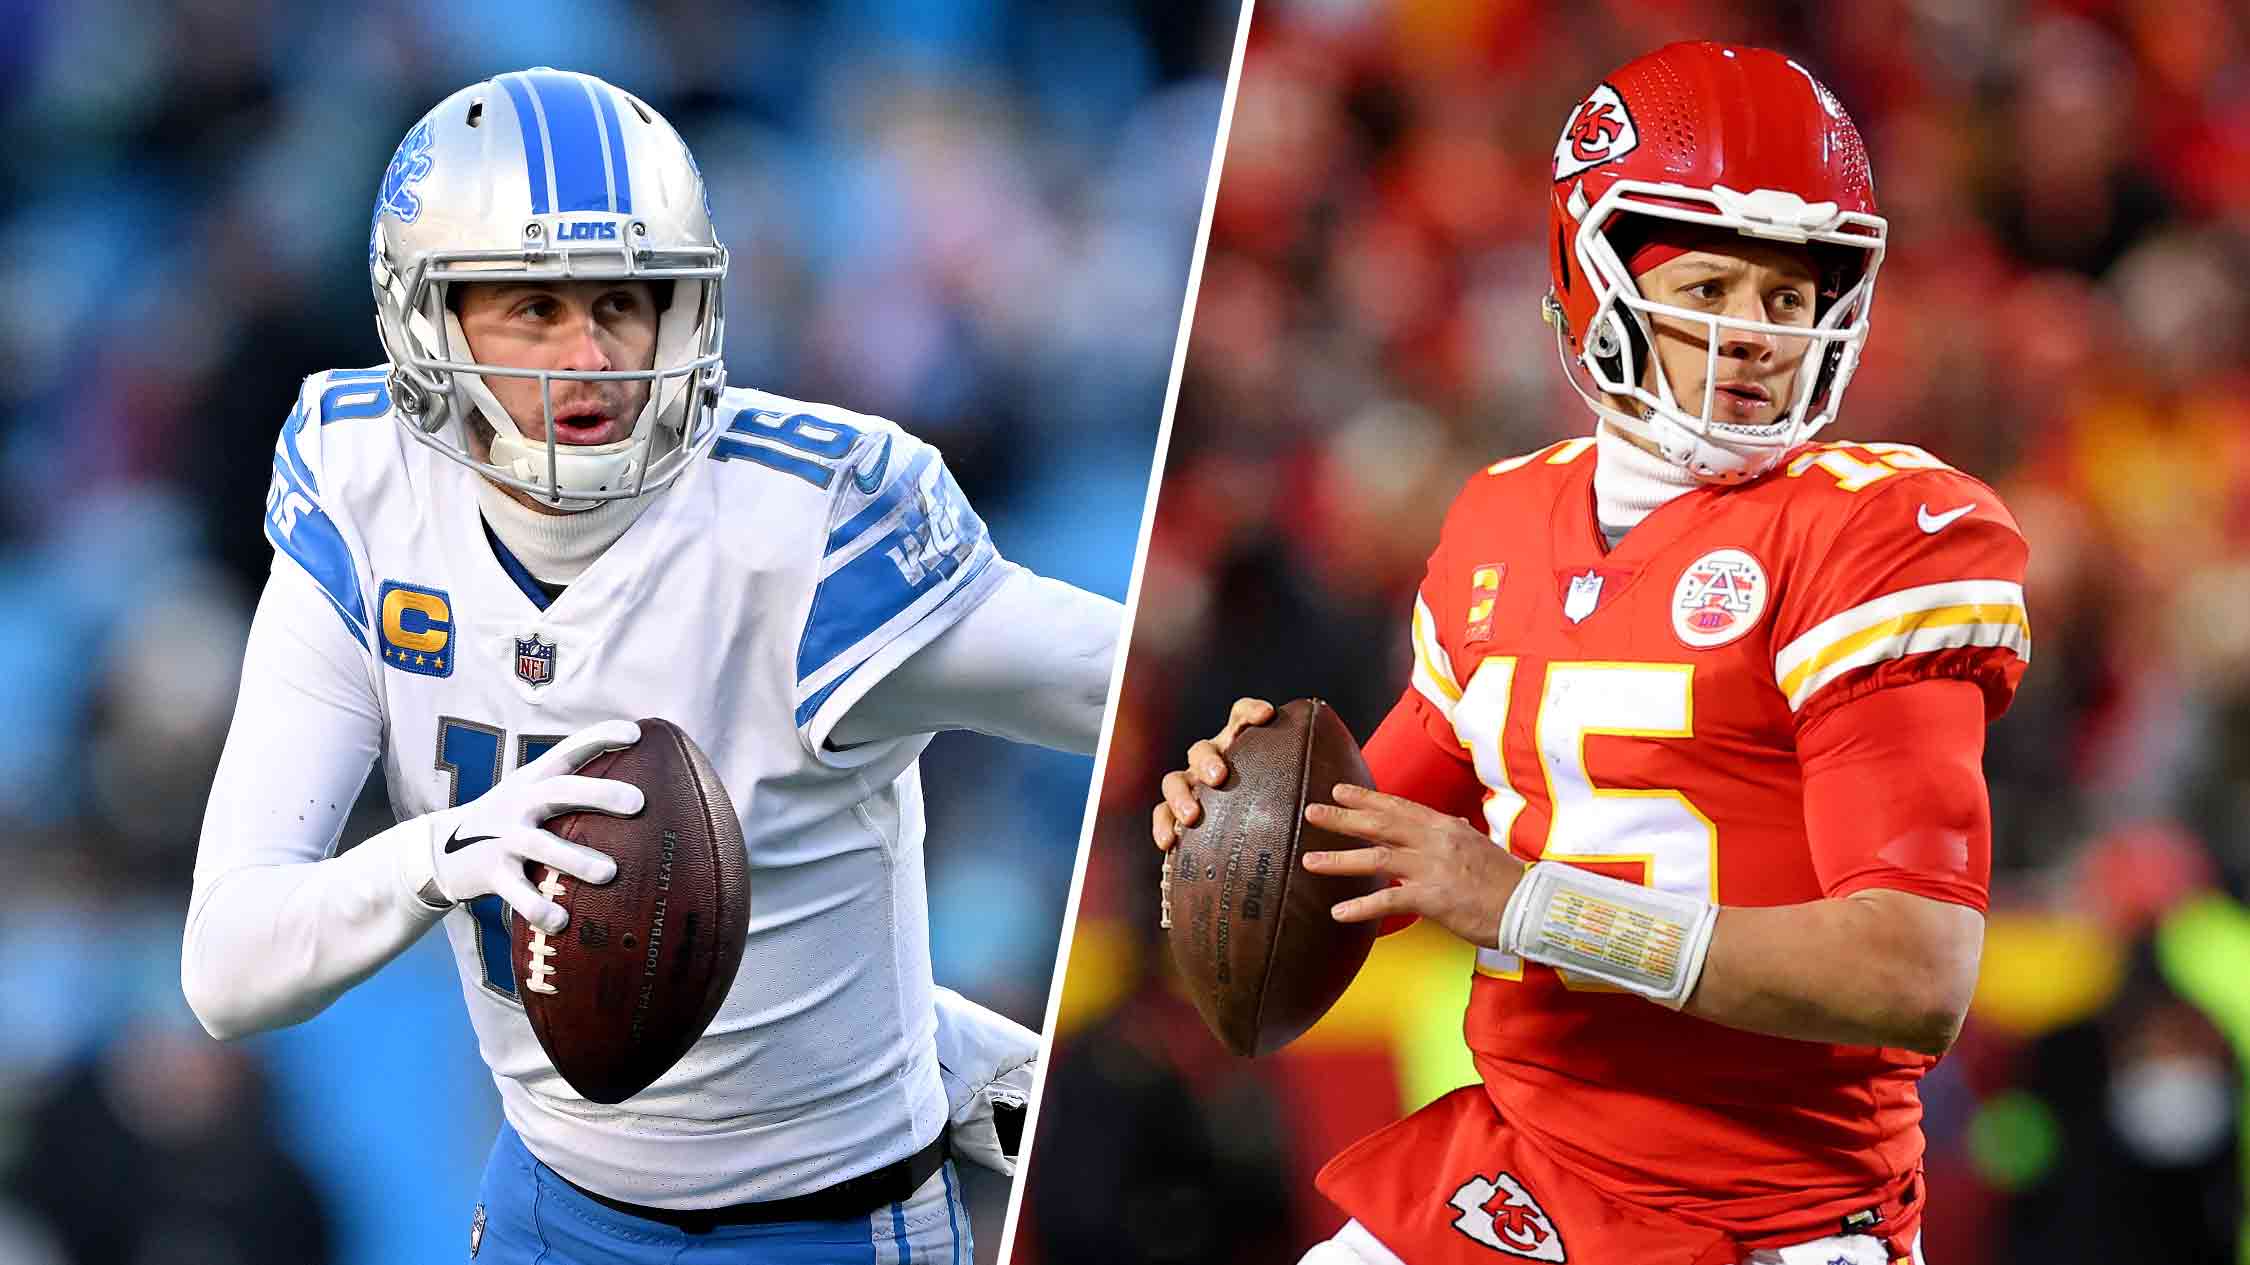 Detroit Lions: How to Live Stream All 17 Lions NFL Games Online